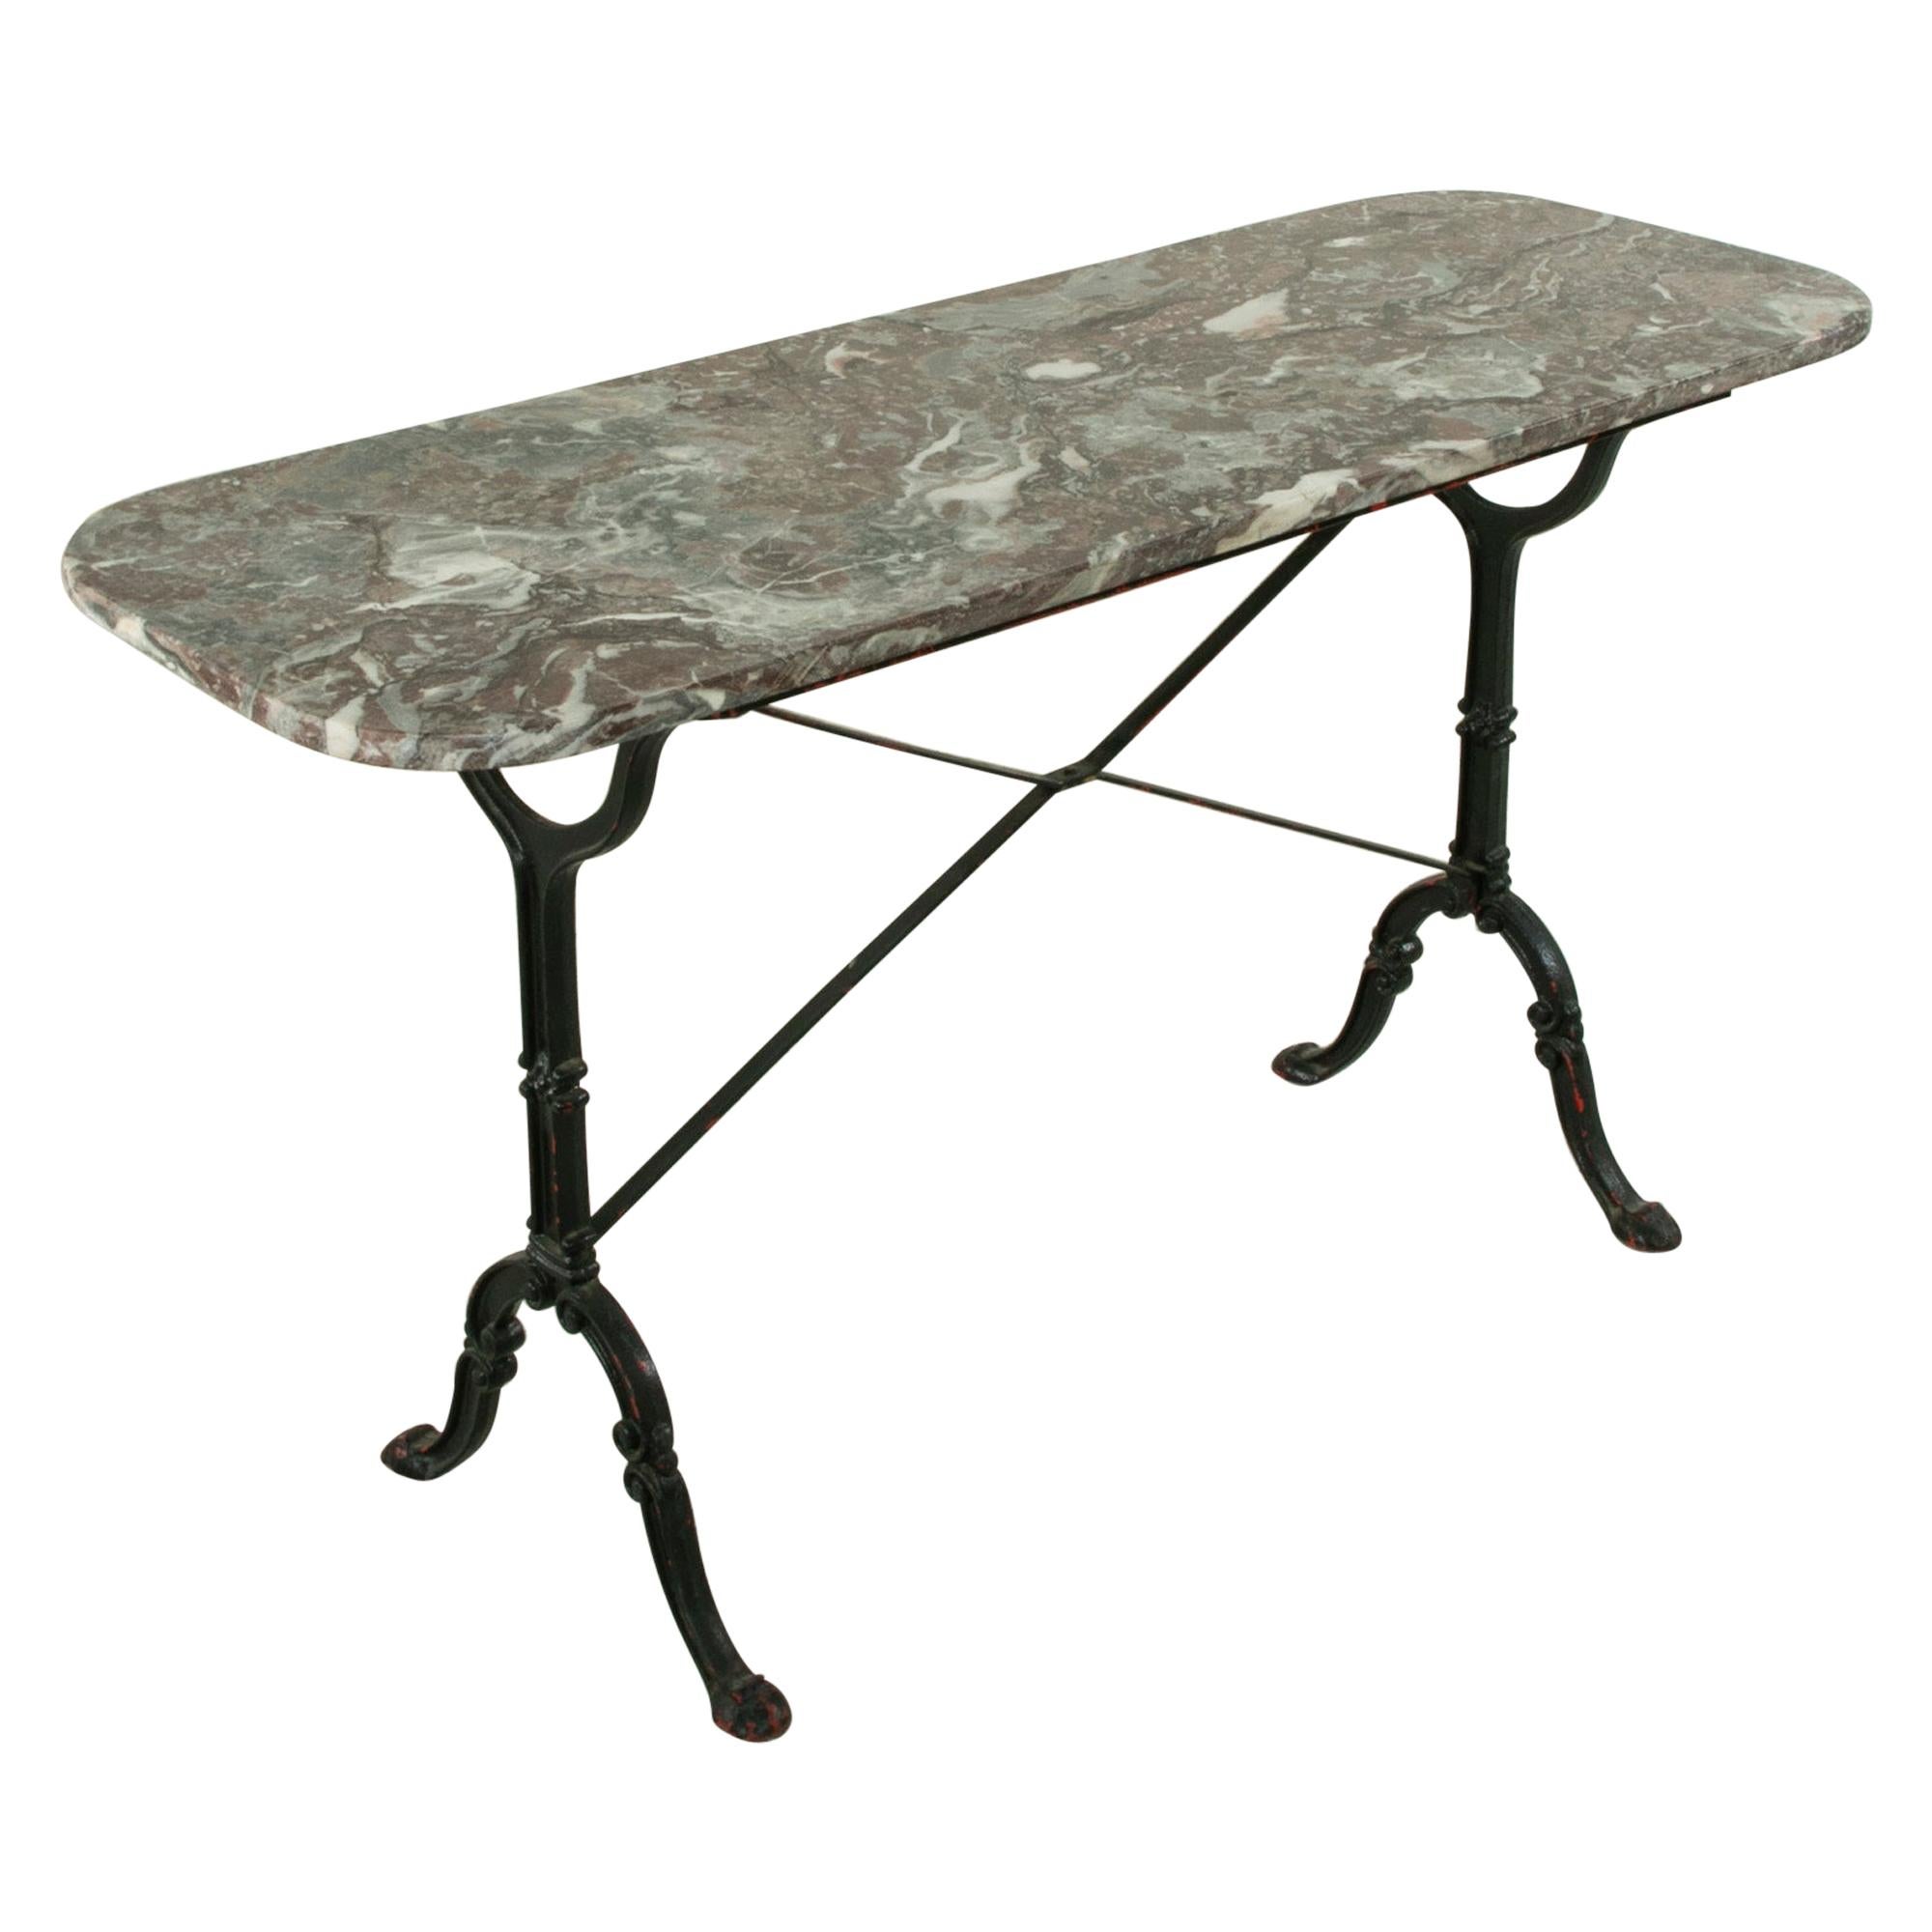 Early 20th Century French Iron Bistro Table or Outdoor Garden Table with Marble